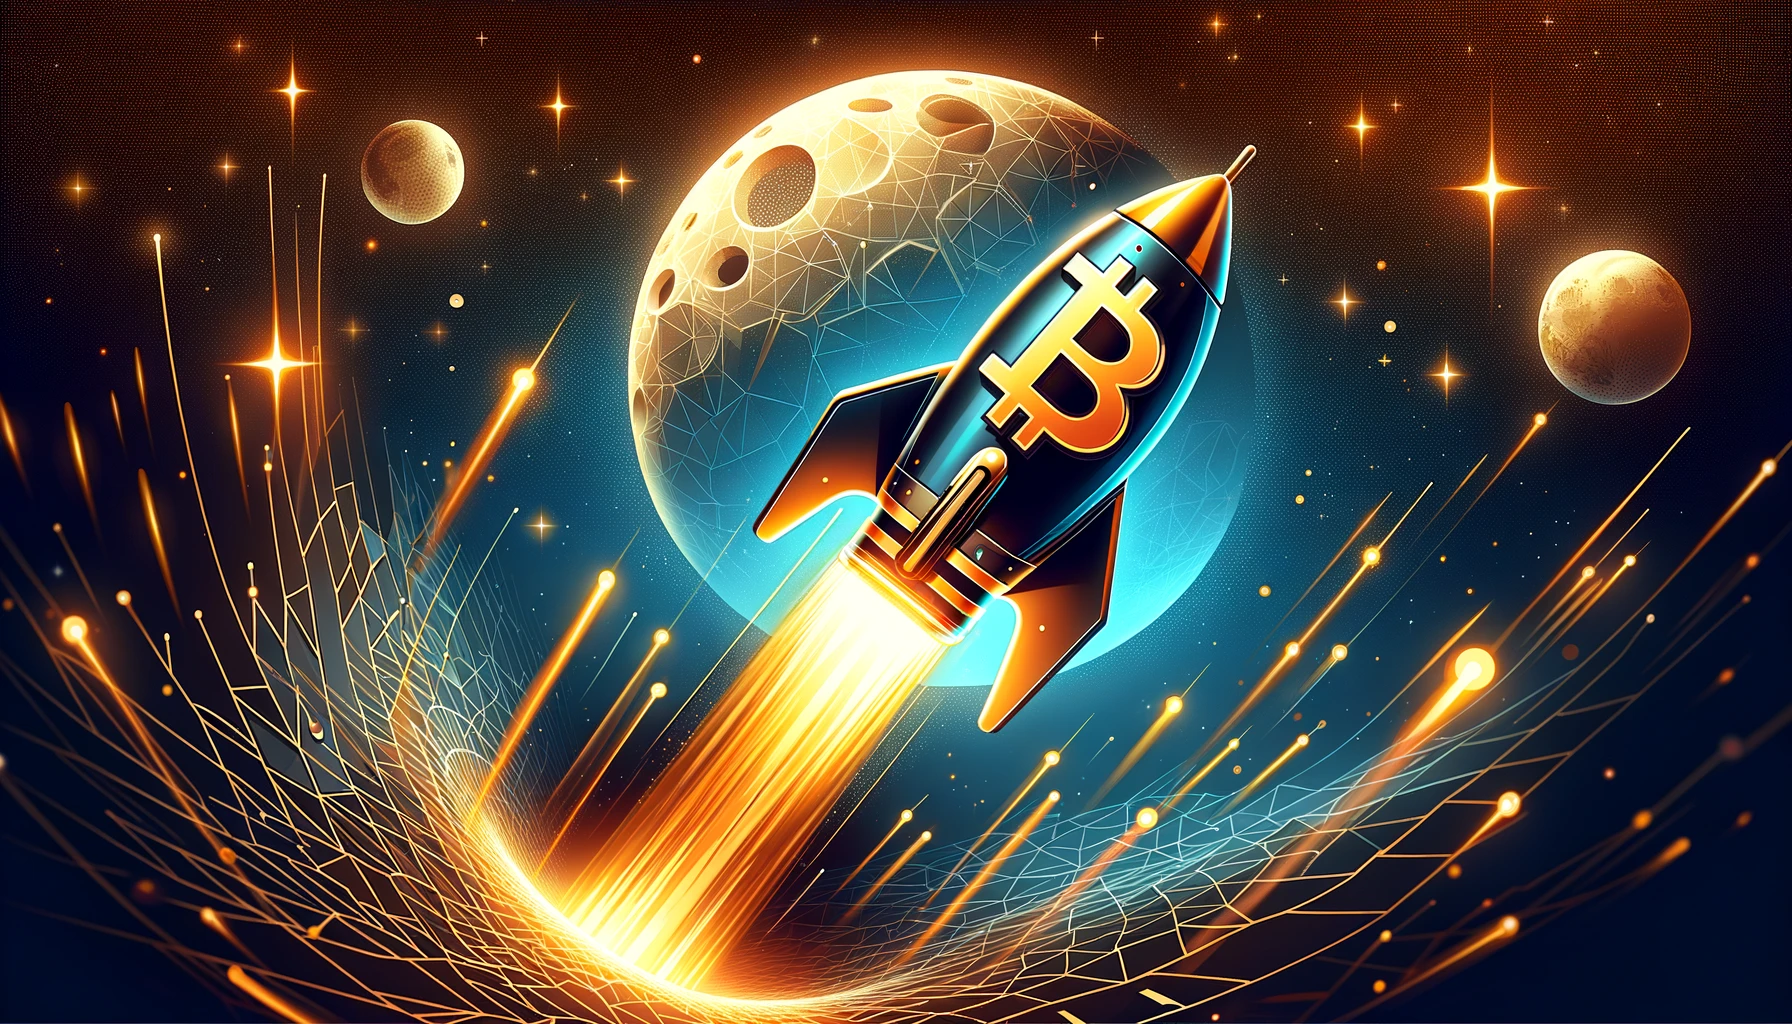 A Monumental Week in Crypto: The Final Push for BTC ETF Approvals